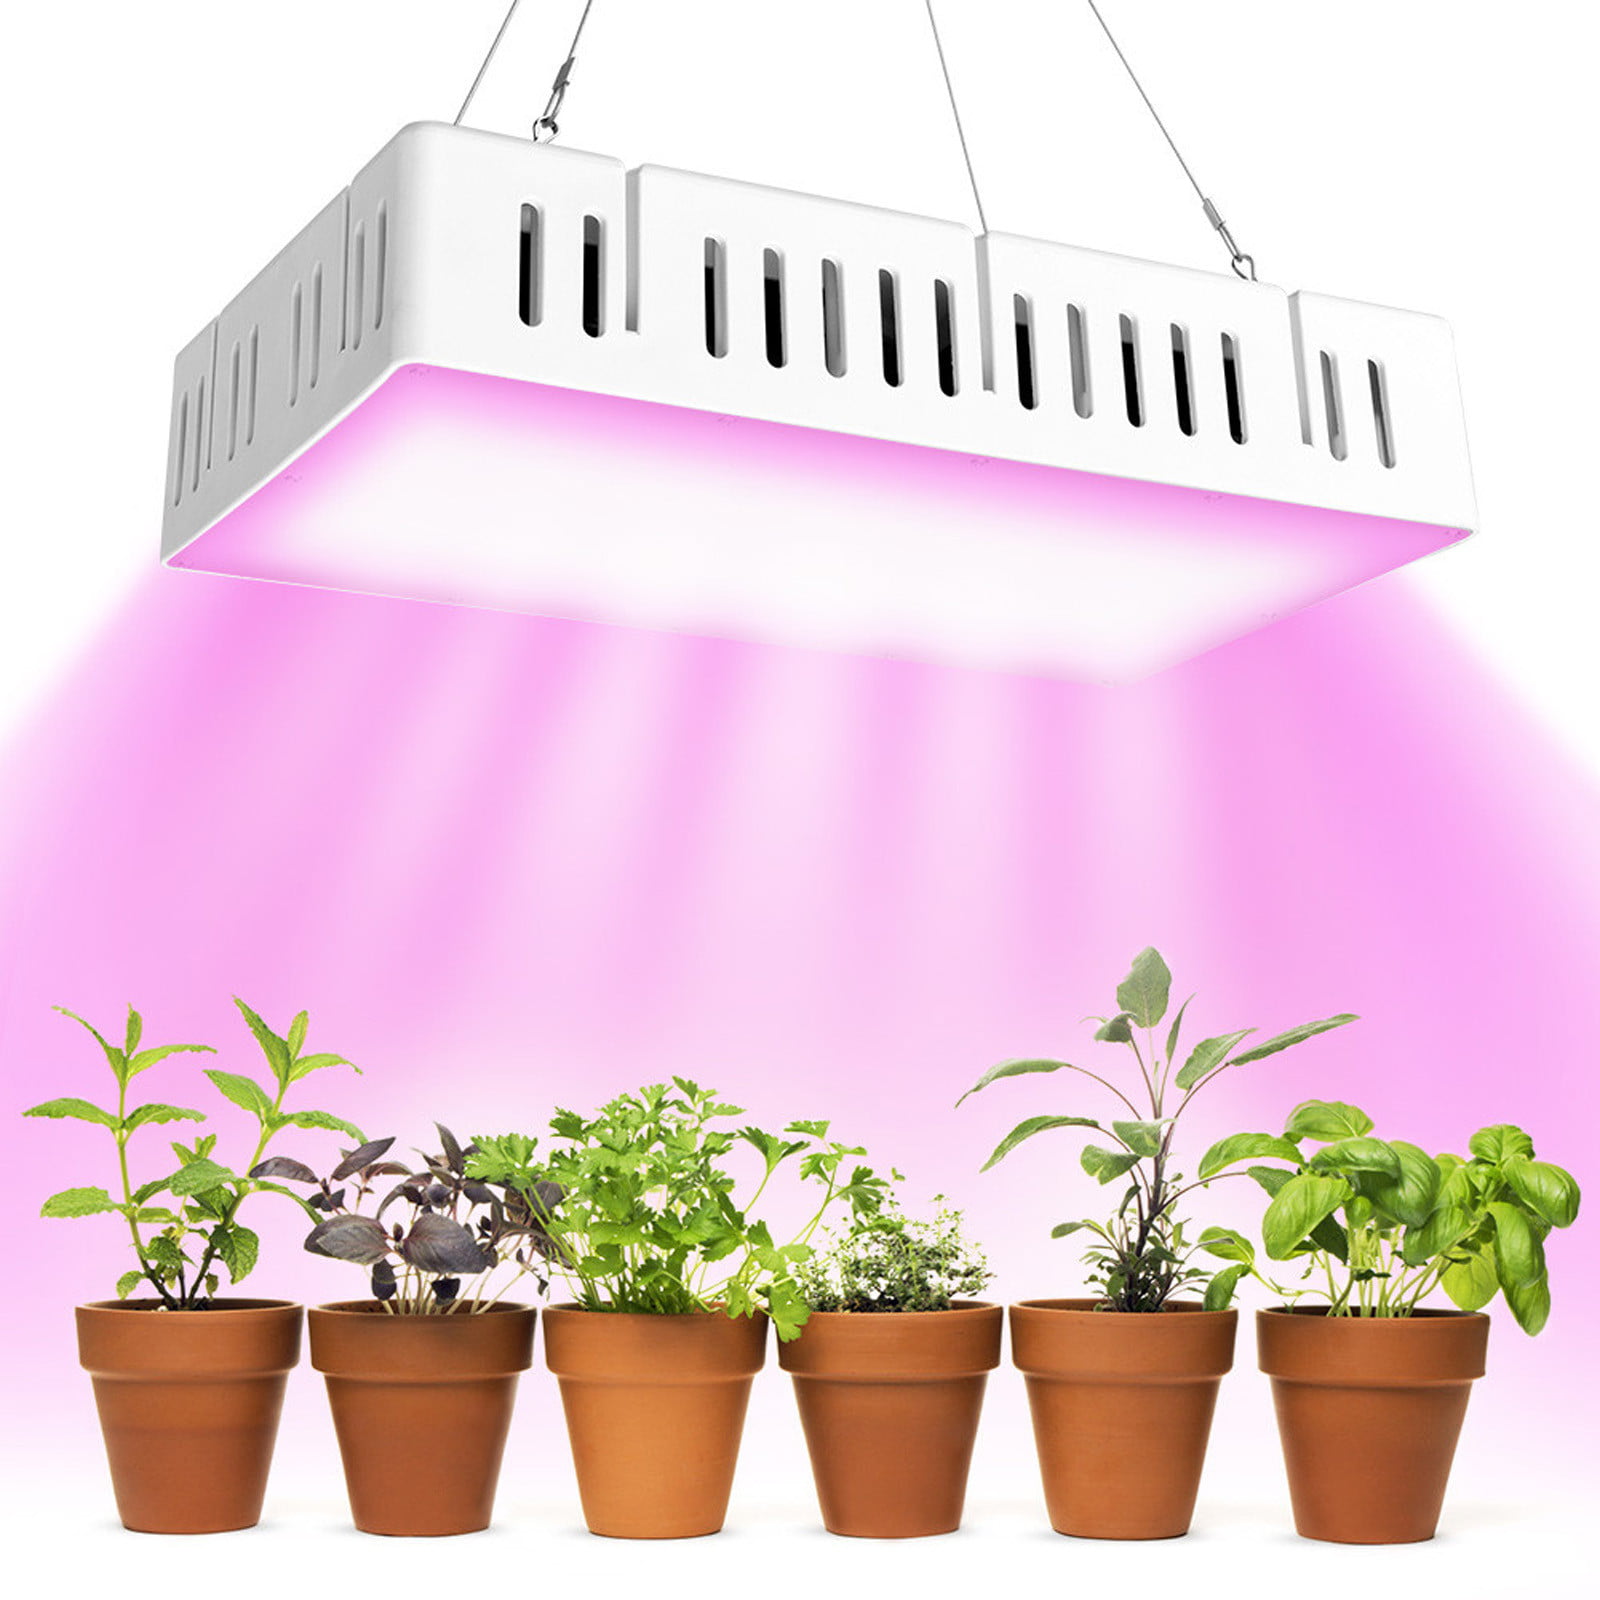 Details about   4 Heads LED Grow Light Plant Growing Lamp Lights for Indoor Plants Hydroponics 